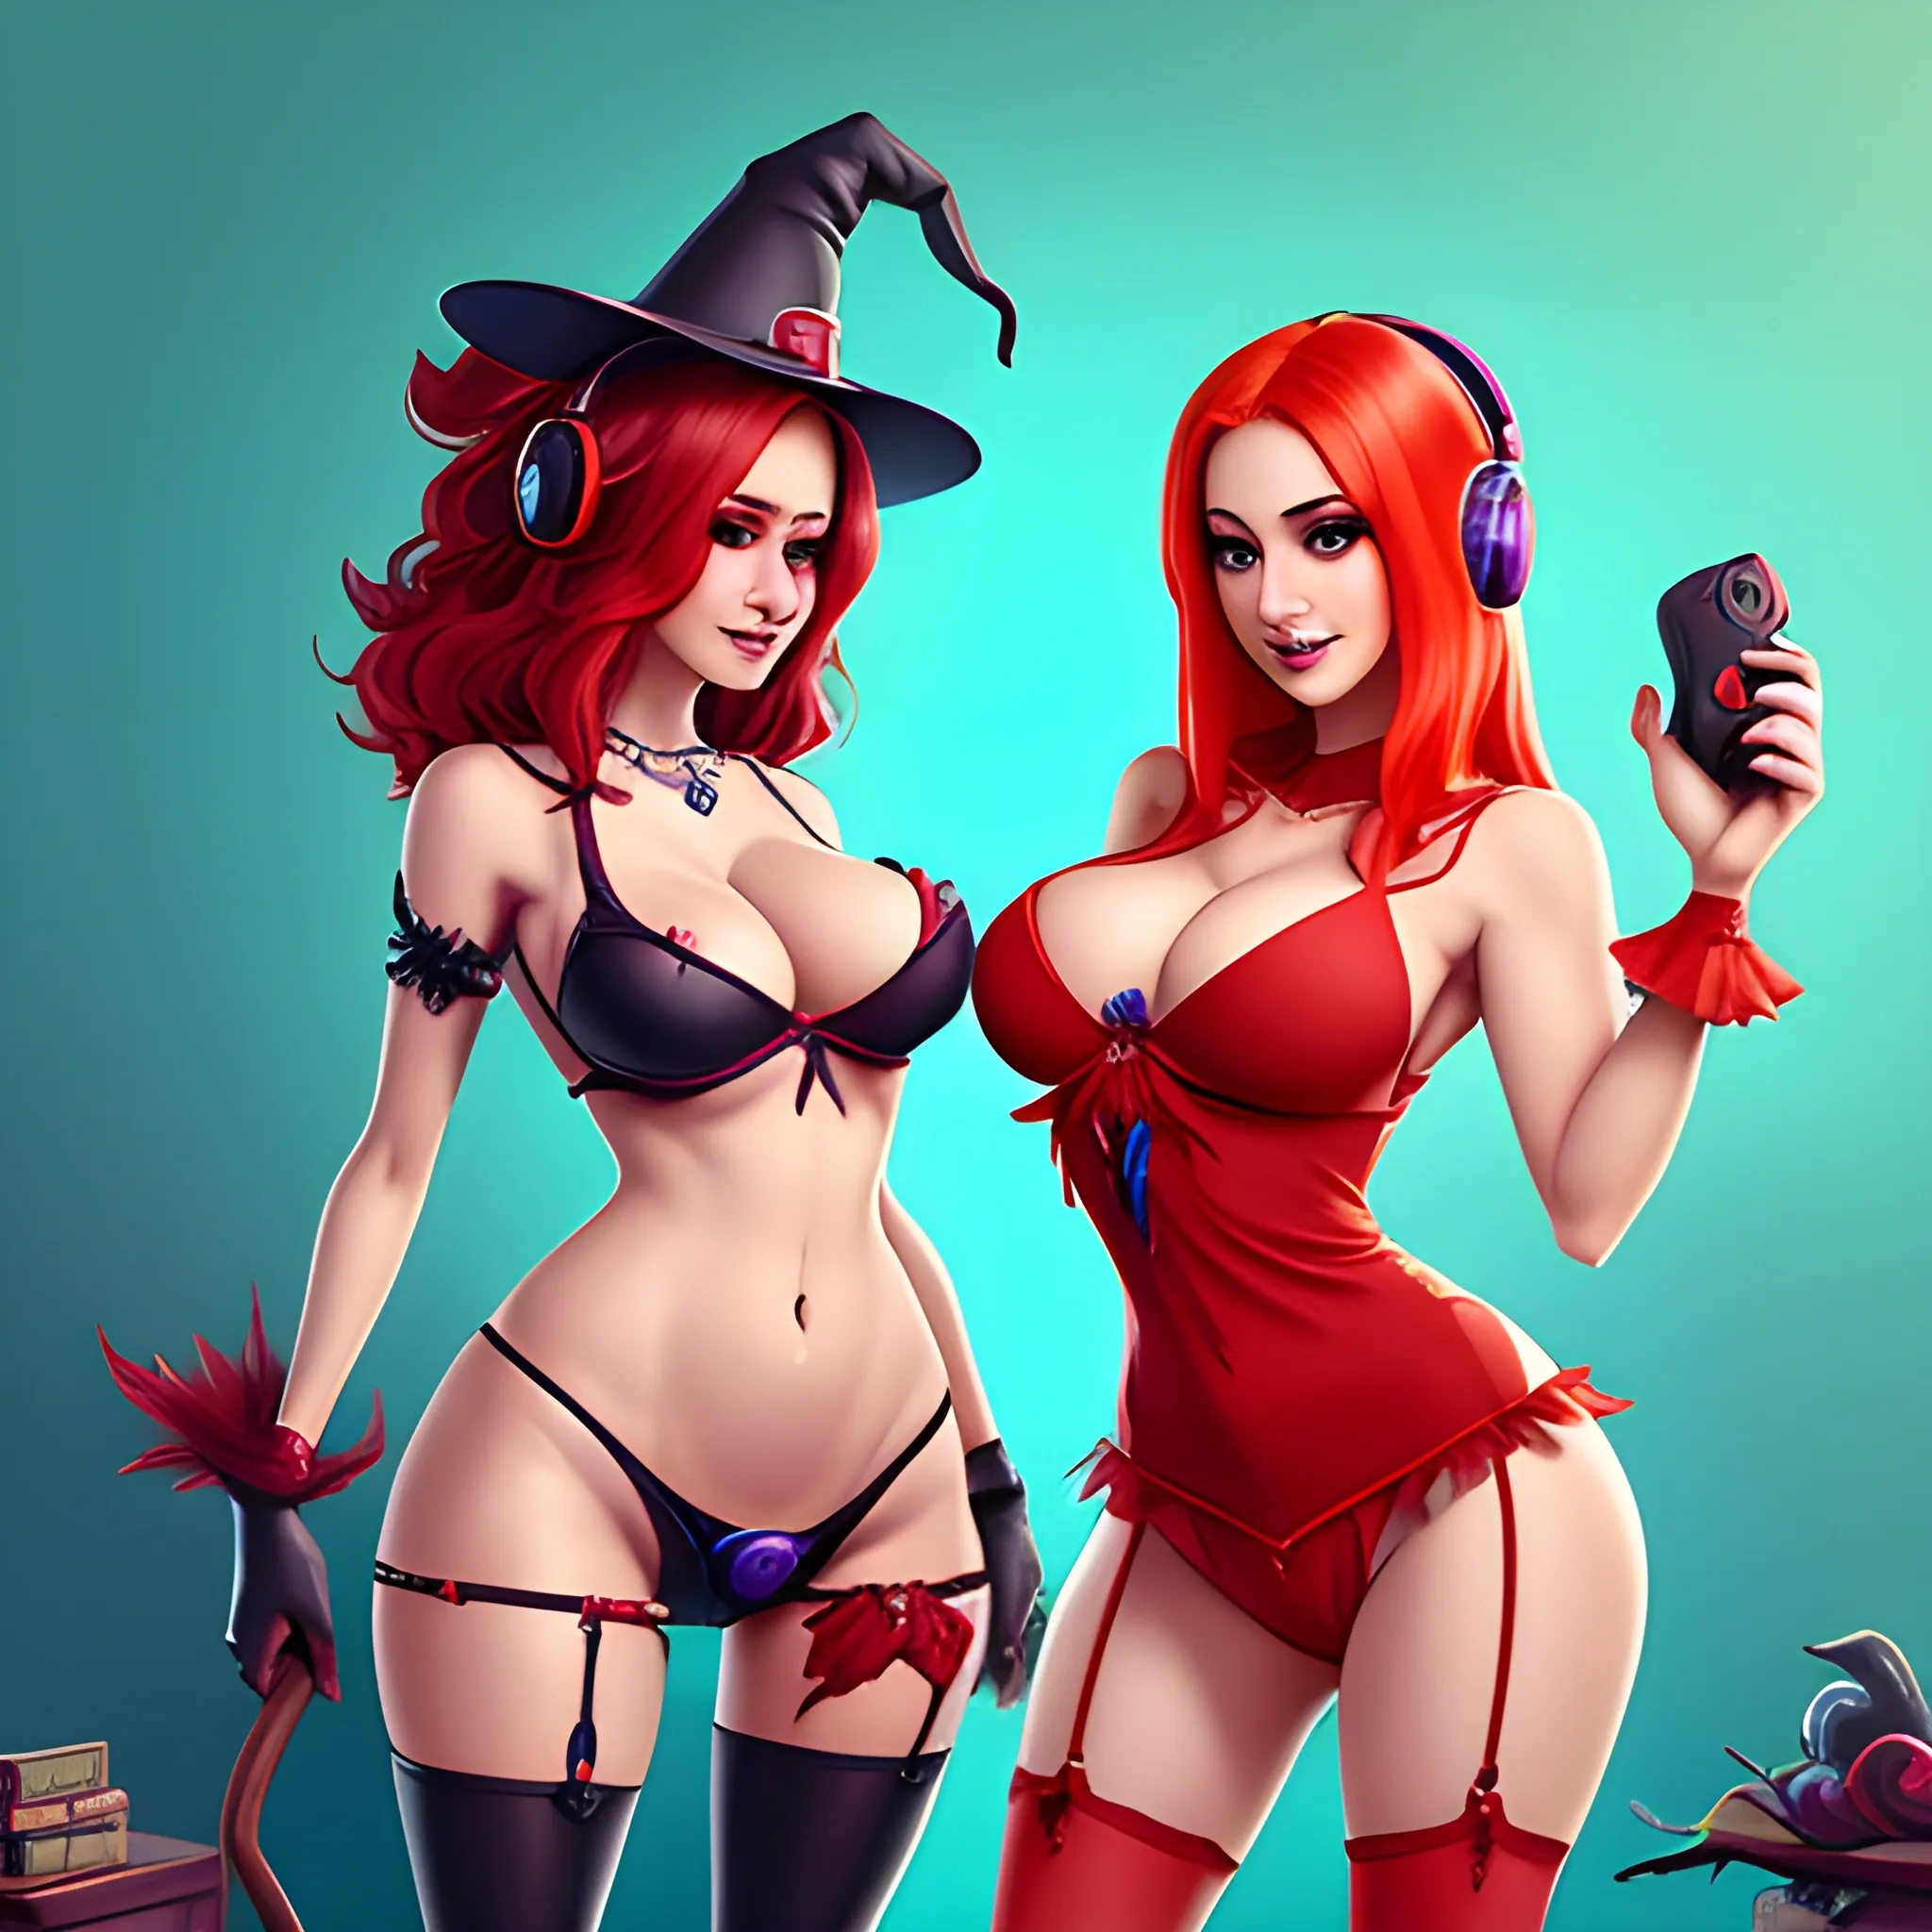 beautiful mascot of a witch with her husband, skimpy red clothes and attract gaming headphones , they have gaming PS5 controller in their hands, breasty, fantasy concept art, 4k resolution, streaming room, strong colours, eye catching mascot , Cartoon